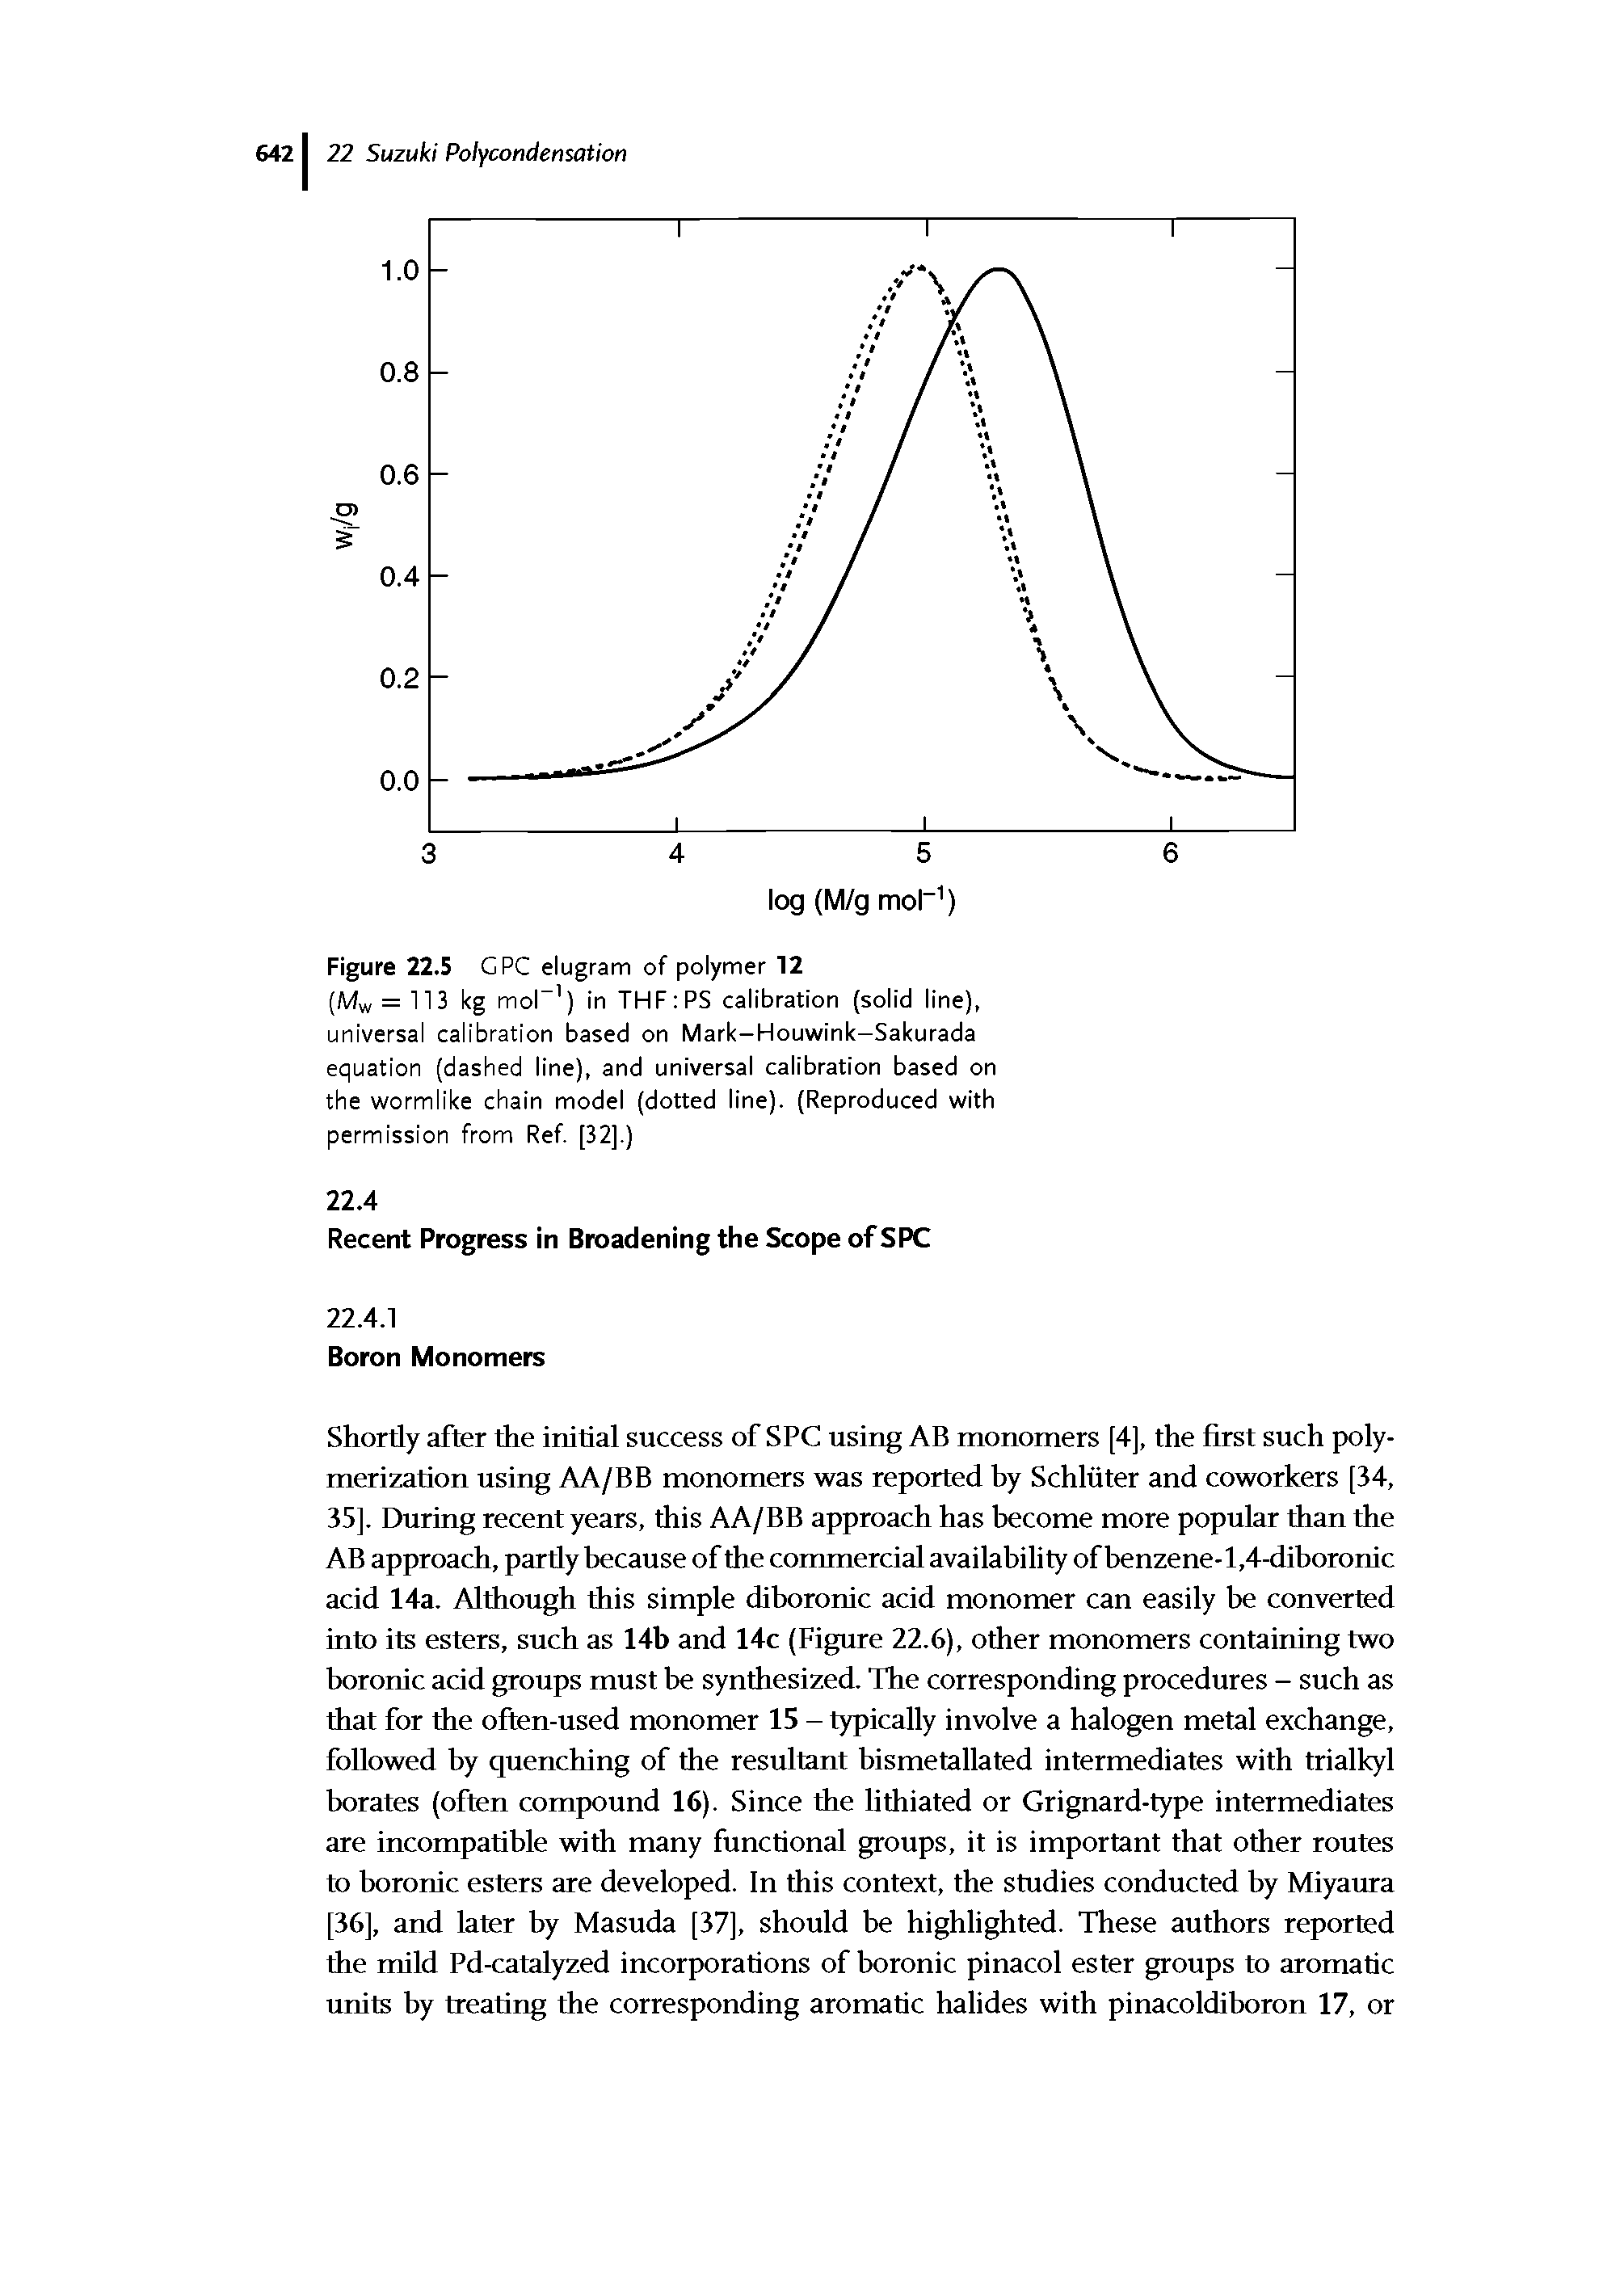 Figure 22.S GPC elugram of polymer 12 (Mw = 113 kg mop ) in THF PS calibration (solid line), universal calibration based on Mark-Houwink-Sakurada equation (dashed line), and universal calibration based on the wormlike chain model (dotted line). (Reproduced with permission from Ref [32].)...